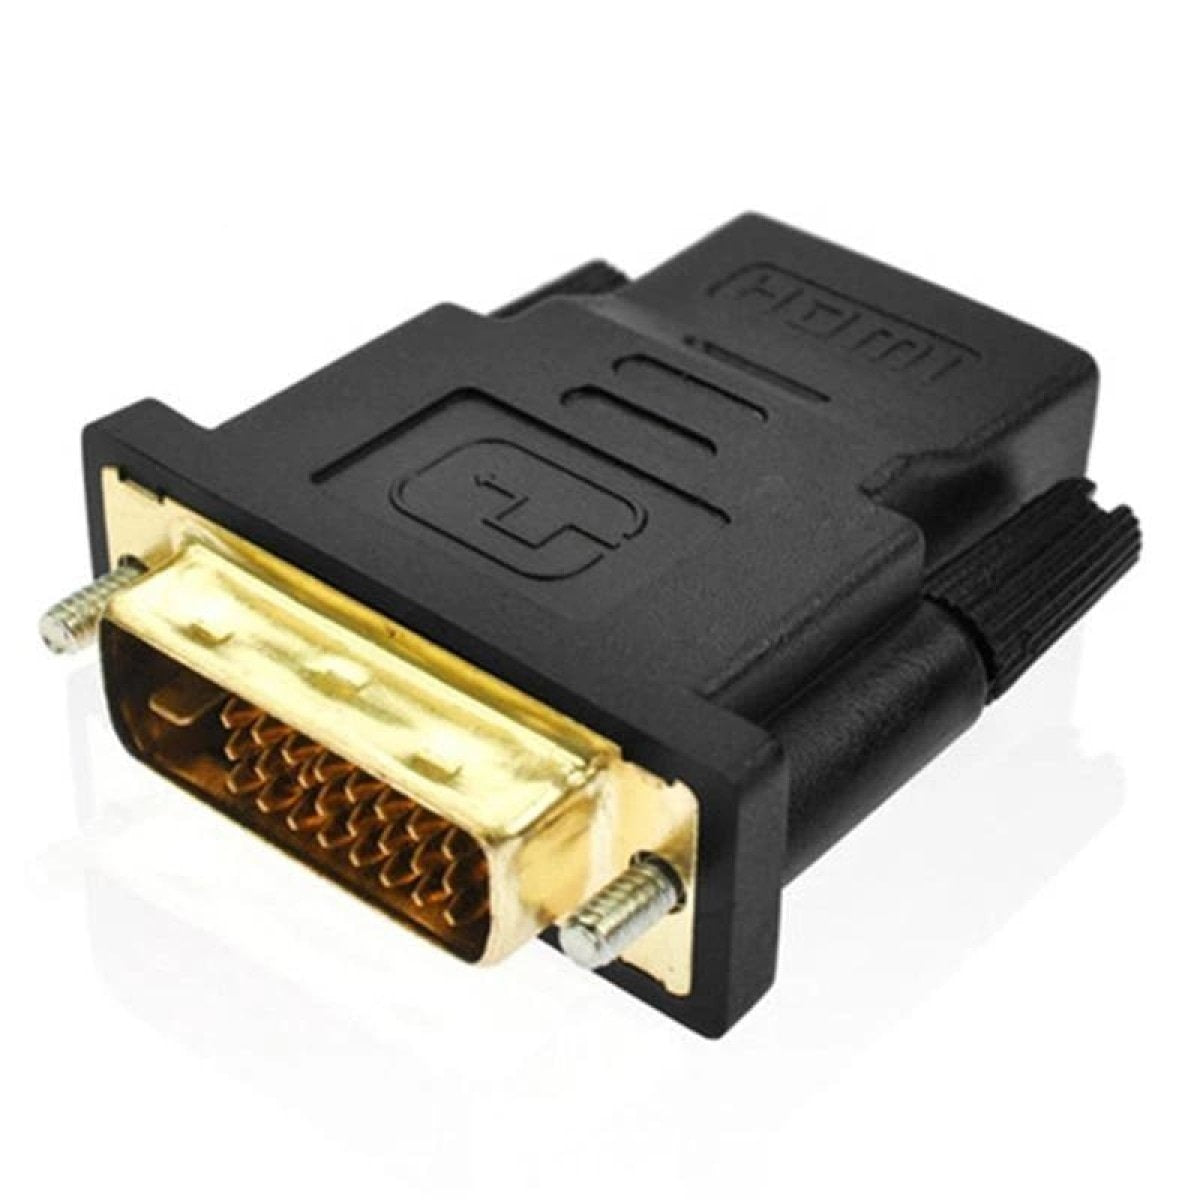 HDMI to DVI Cable 24+1 Pin Adaptor 4K Bi-Directional Male to HDMI Male Converter | 2m | Asia Sell